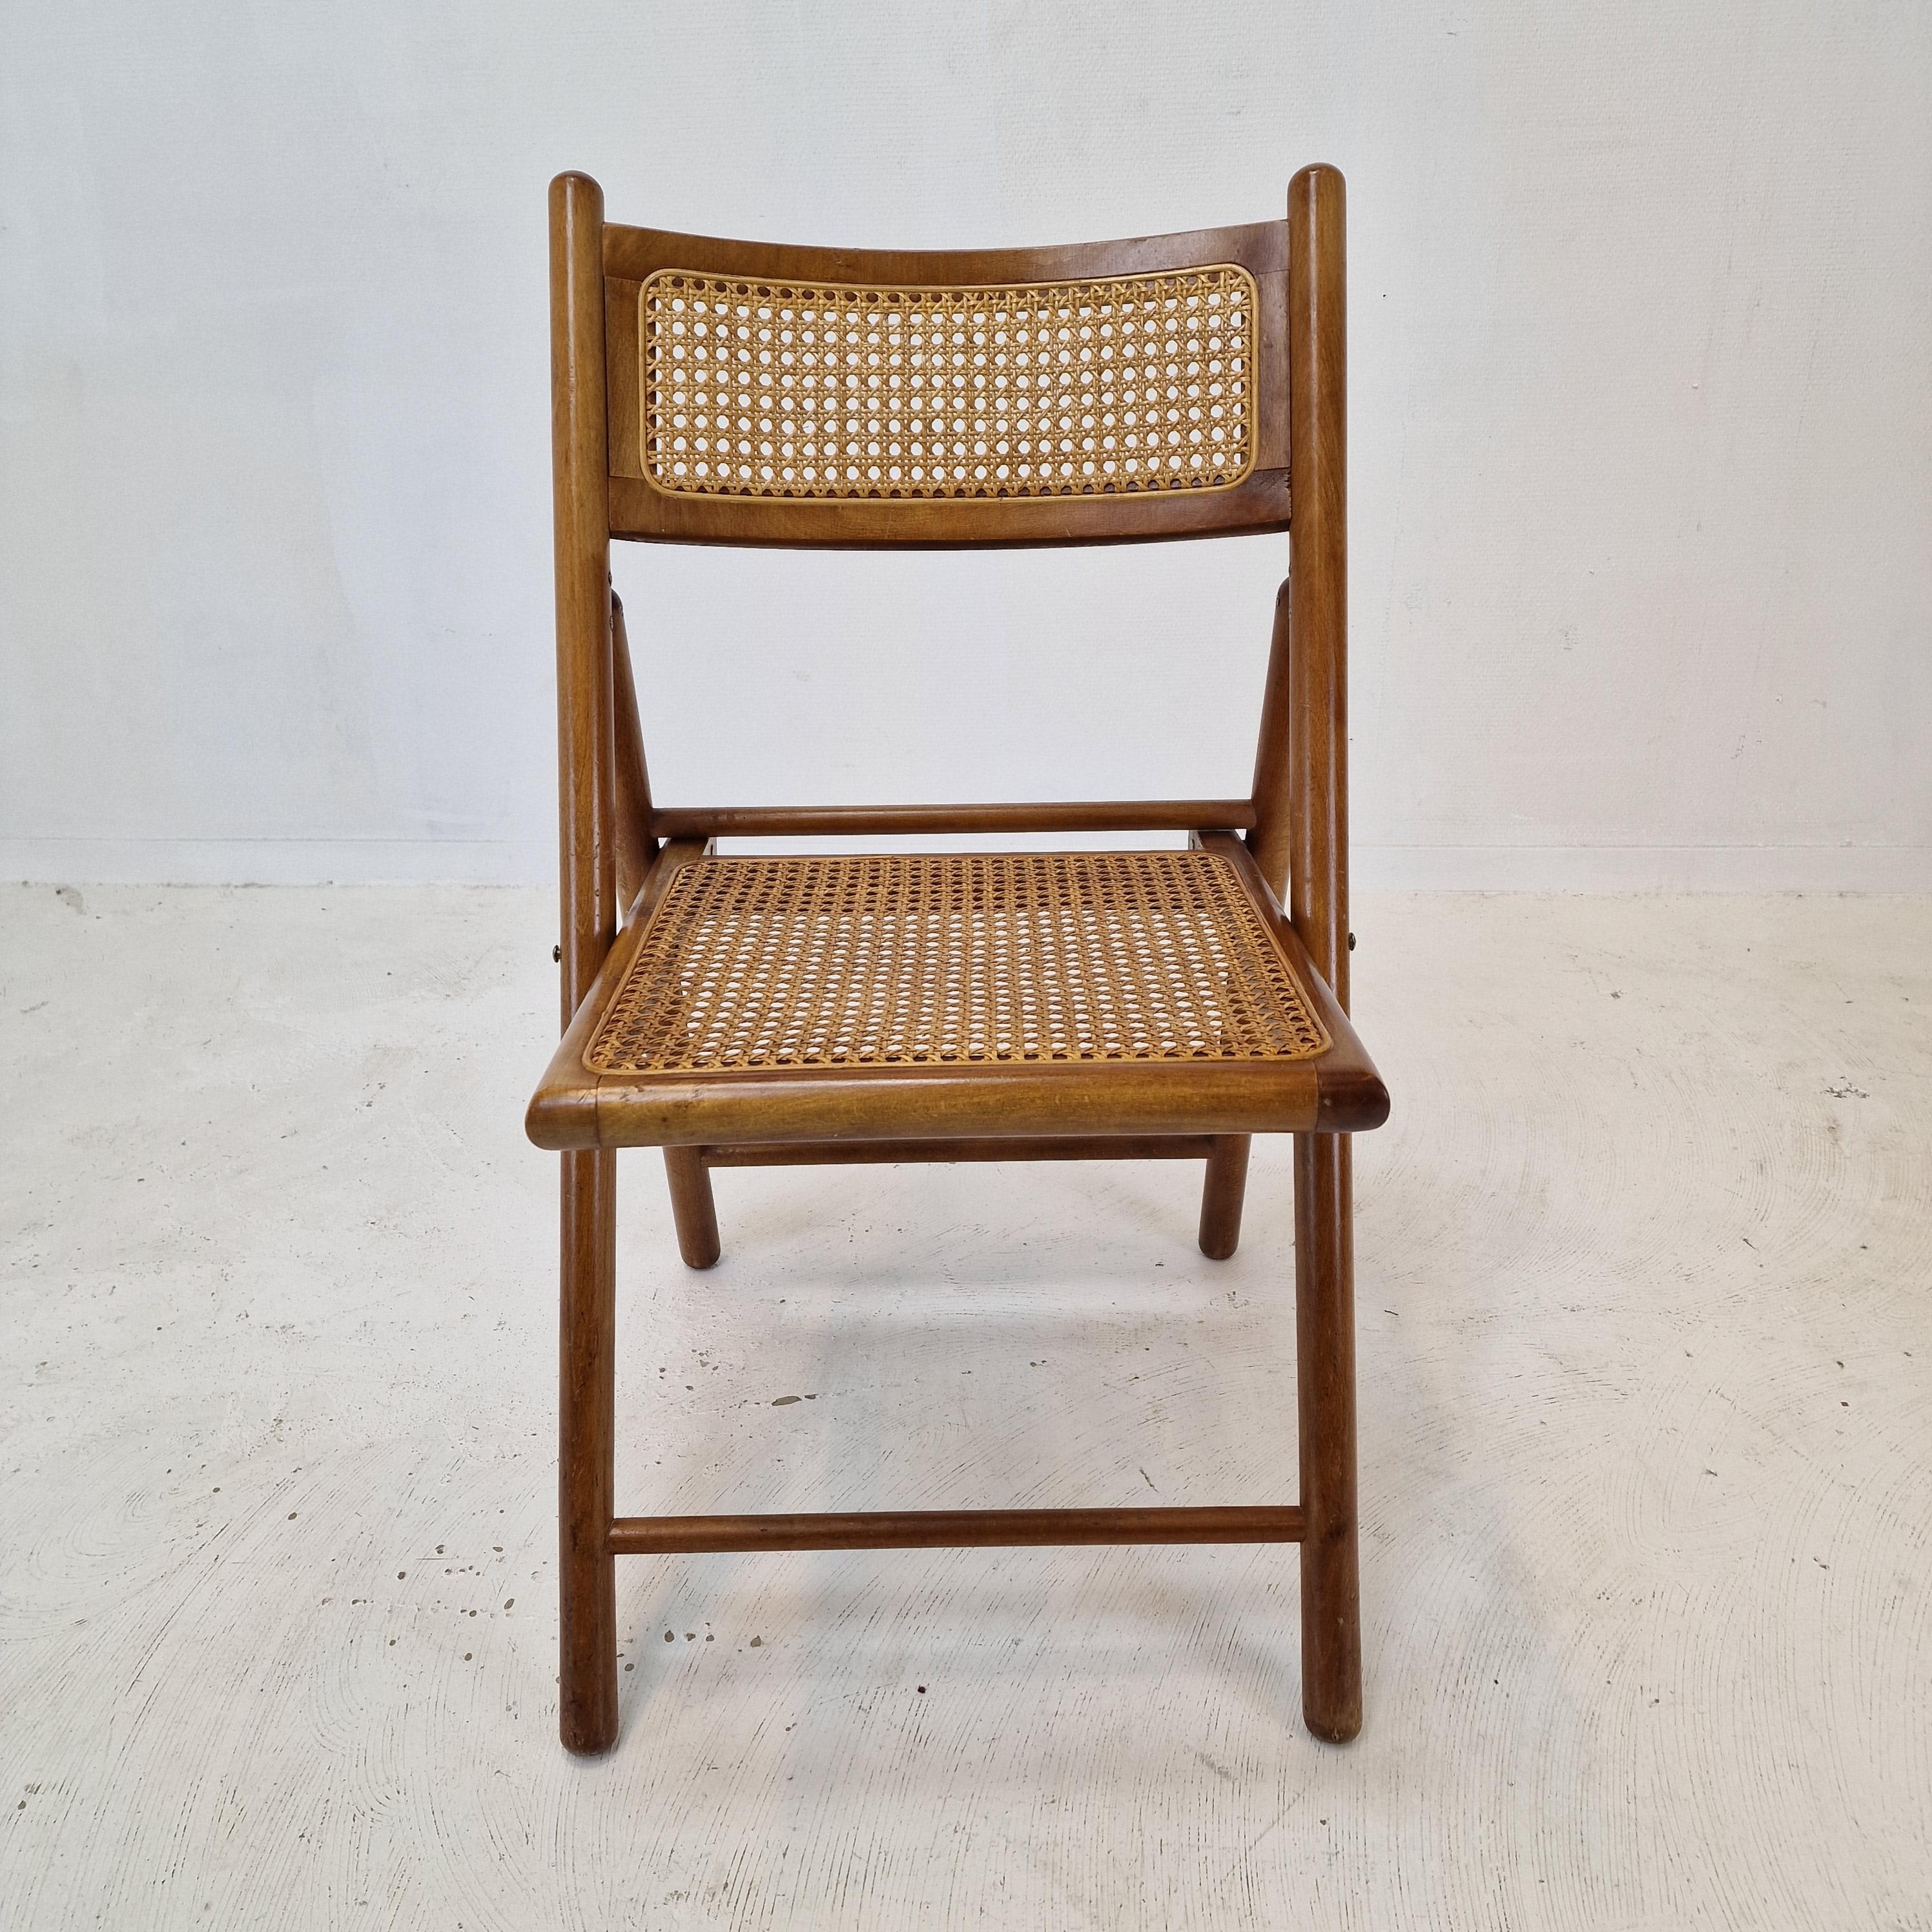 Set of 4 Italian Folding Chairs with Rattan, 1980s For Sale 1